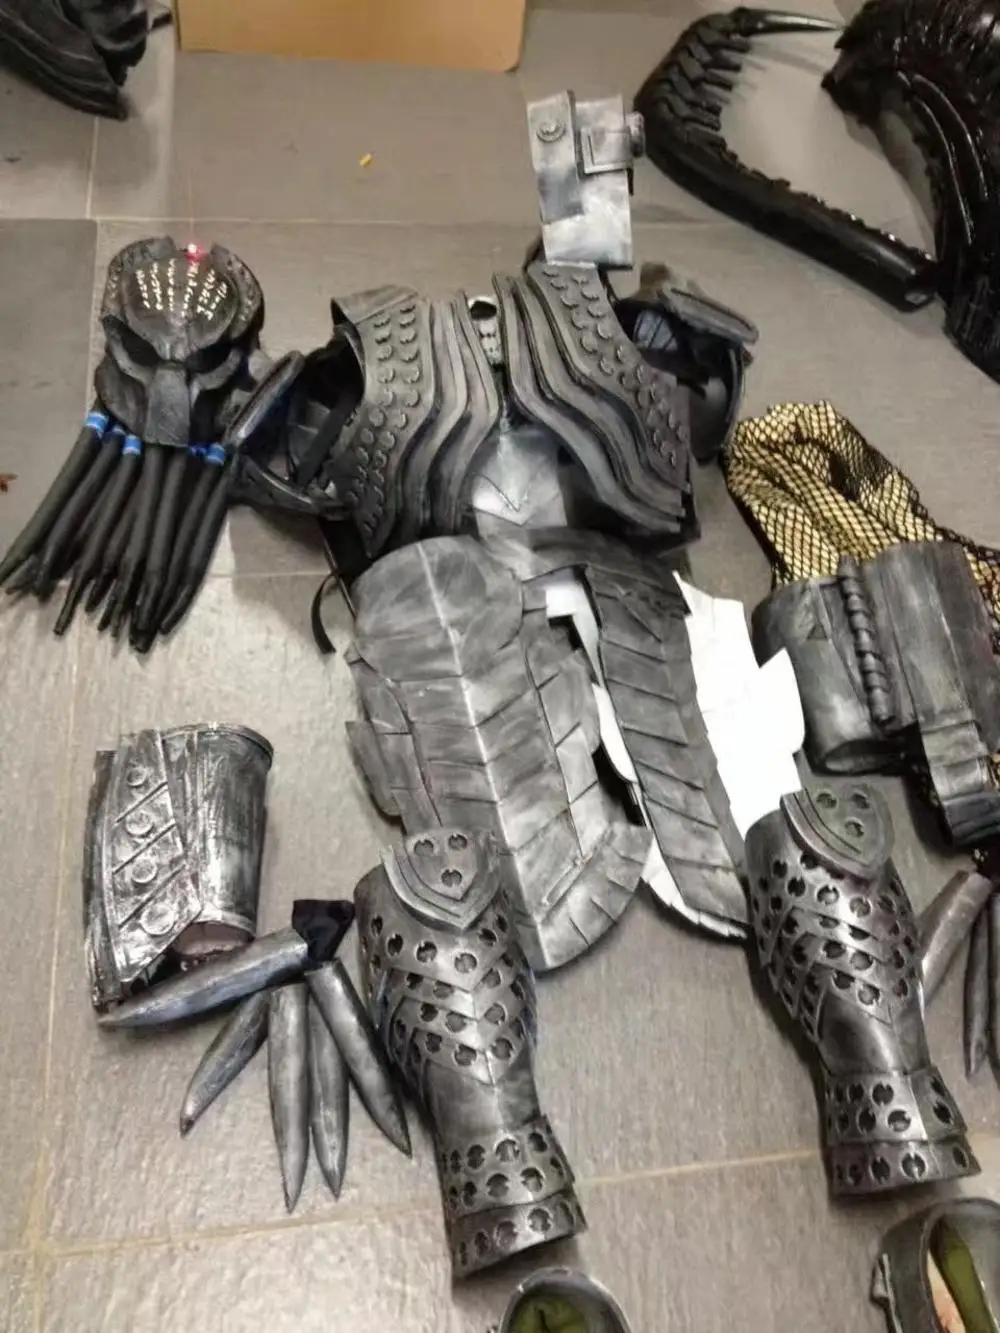 
The Life Size Cosplay Predator Robot Costume For Event Party 